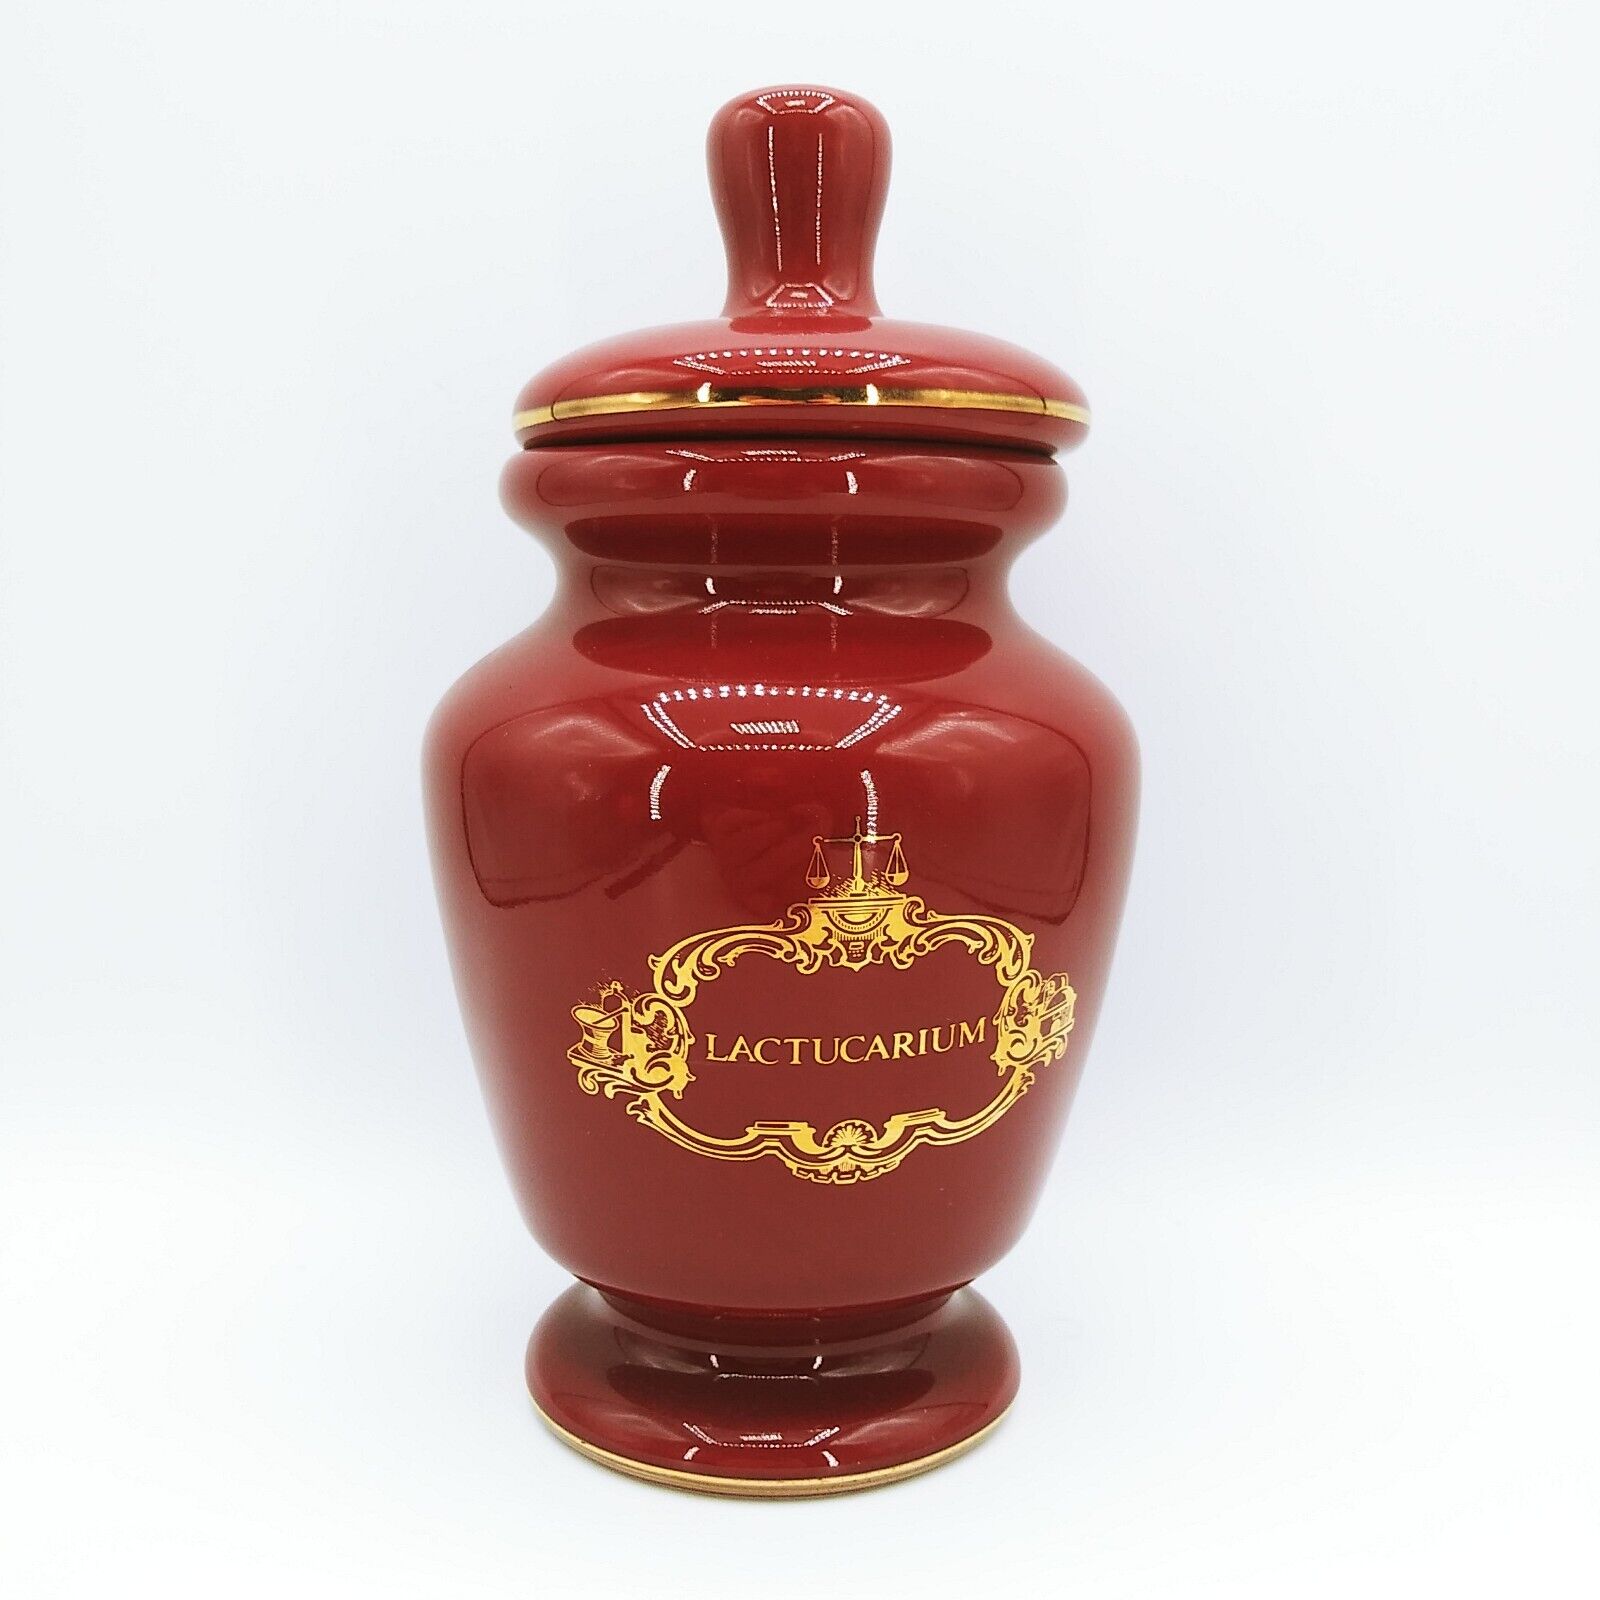 Vintage Eli Lilly Apothecary Pharmacy Lactucarium Burgundy and Gold 9” Jar & Lid